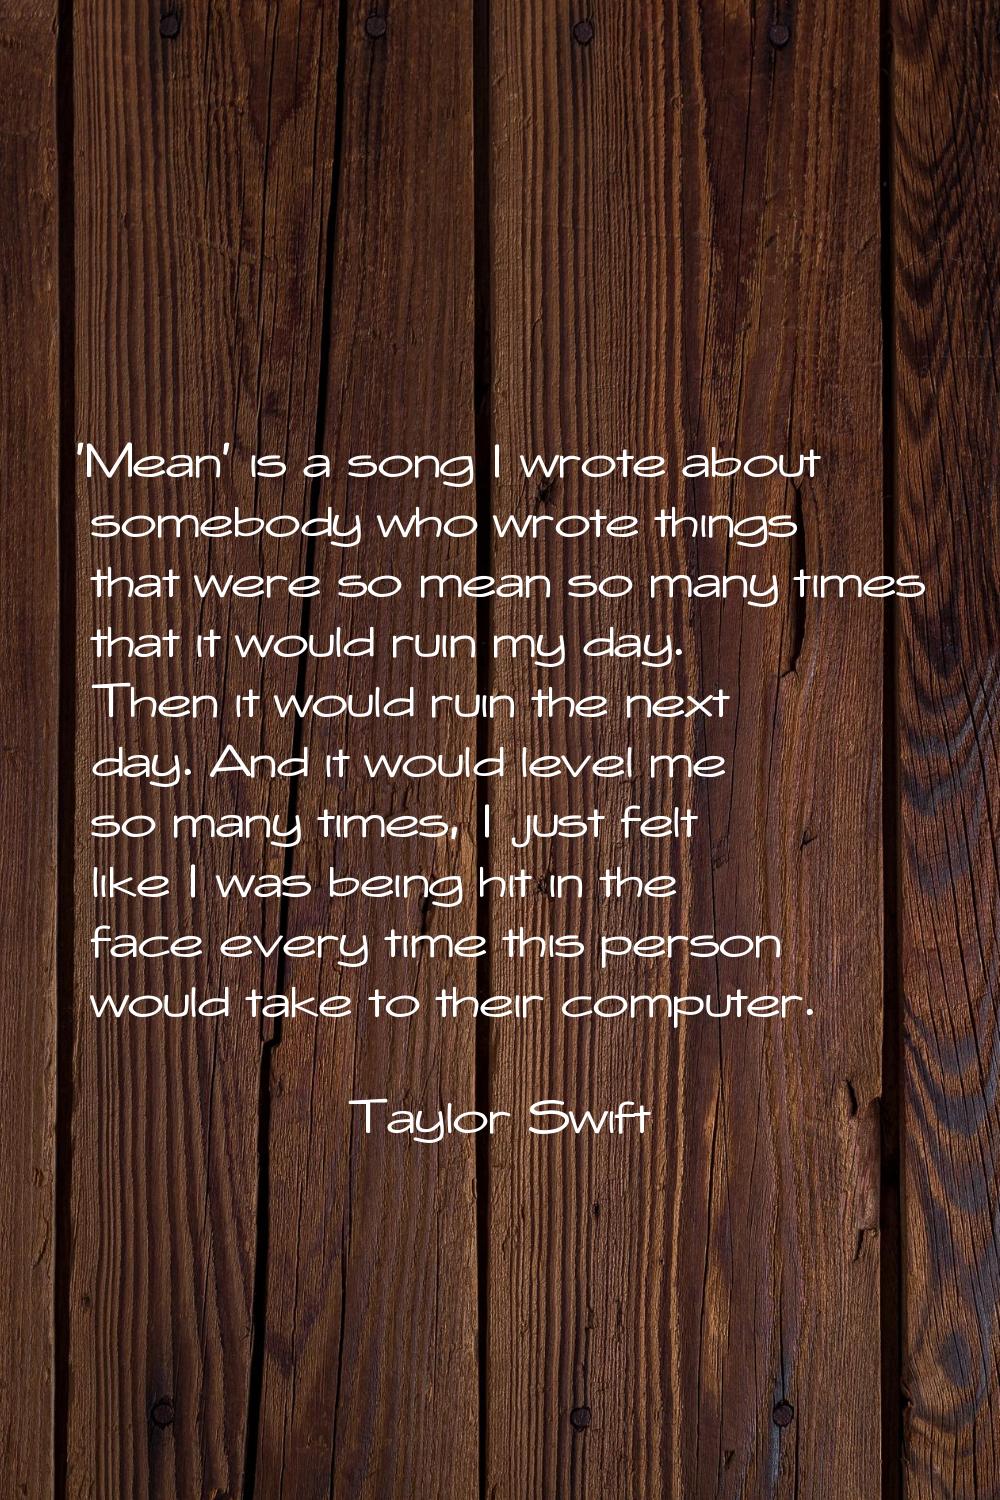 'Mean' is a song I wrote about somebody who wrote things that were so mean so many times that it wo